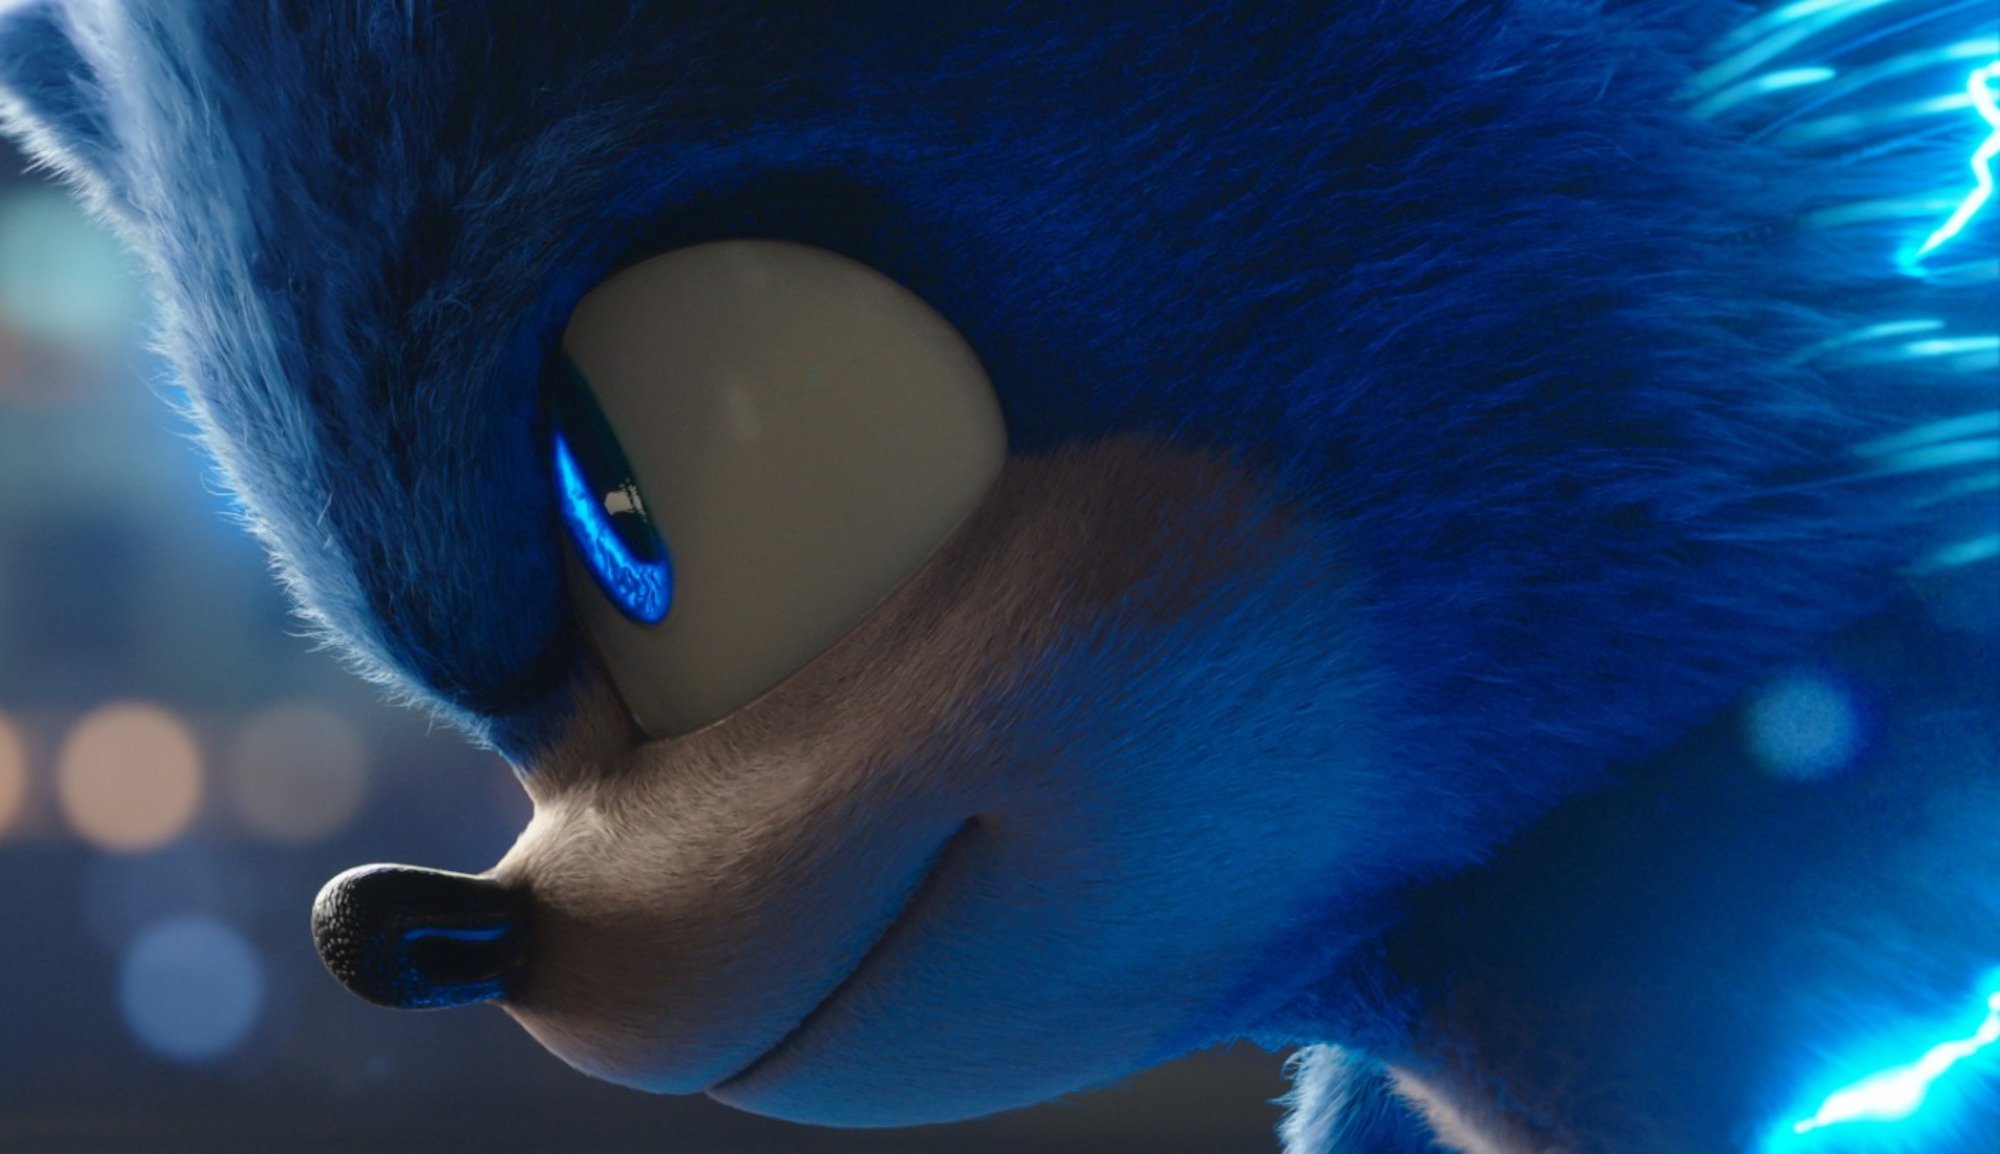 A close-up shot of Sonic the Hedgehog running in Paramount Pictures' 'Sonic the Hedgehog' movie